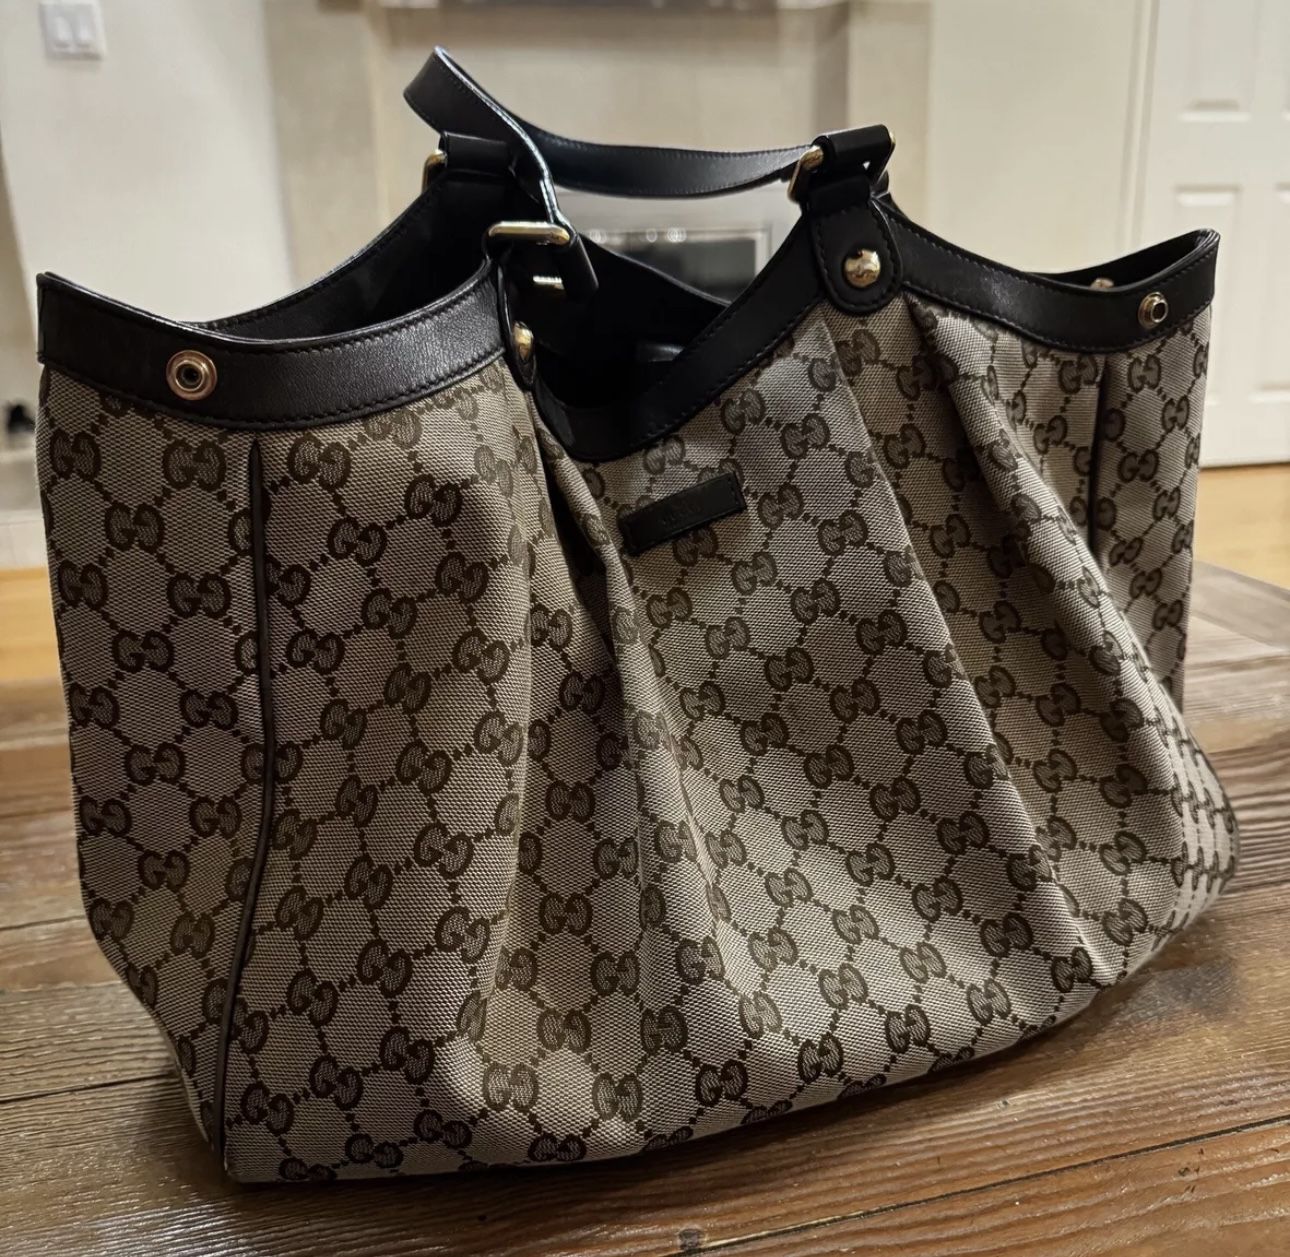 Gucci Leather Tote Brown Canvas Bag Authentic 